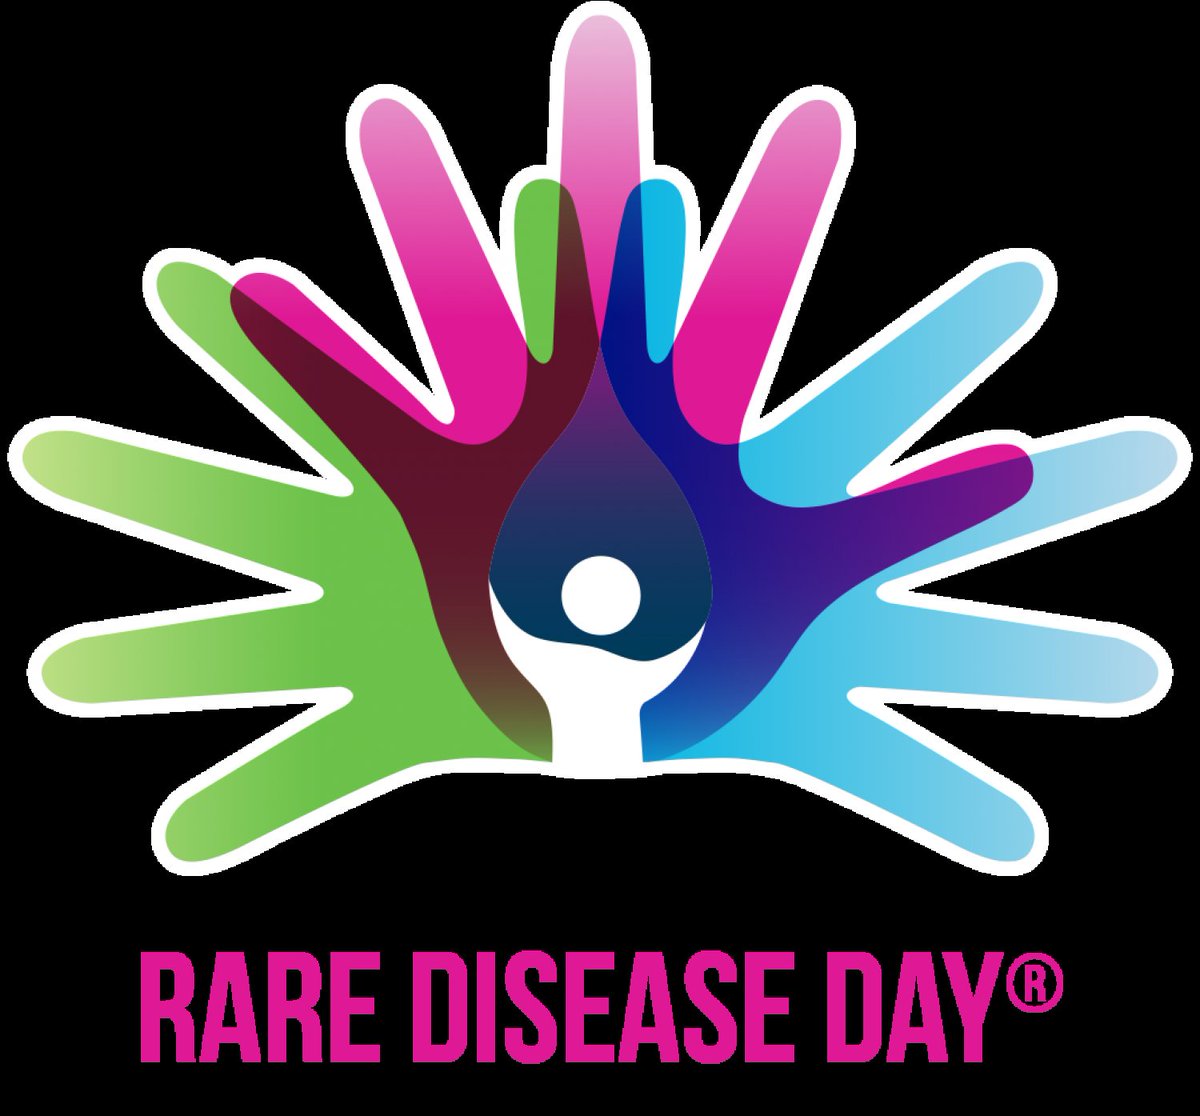 Today is #RareDiseaseDay2024. Clinical pharmacists play a crucial role in supporting patients with lesser-known conditions affecting the liver like #AIH, #PBC, #PSC. Join us in raising awareness and supporting those affected. #LiverHealth #RareDiseaseDay        #ClinicalPharmacy